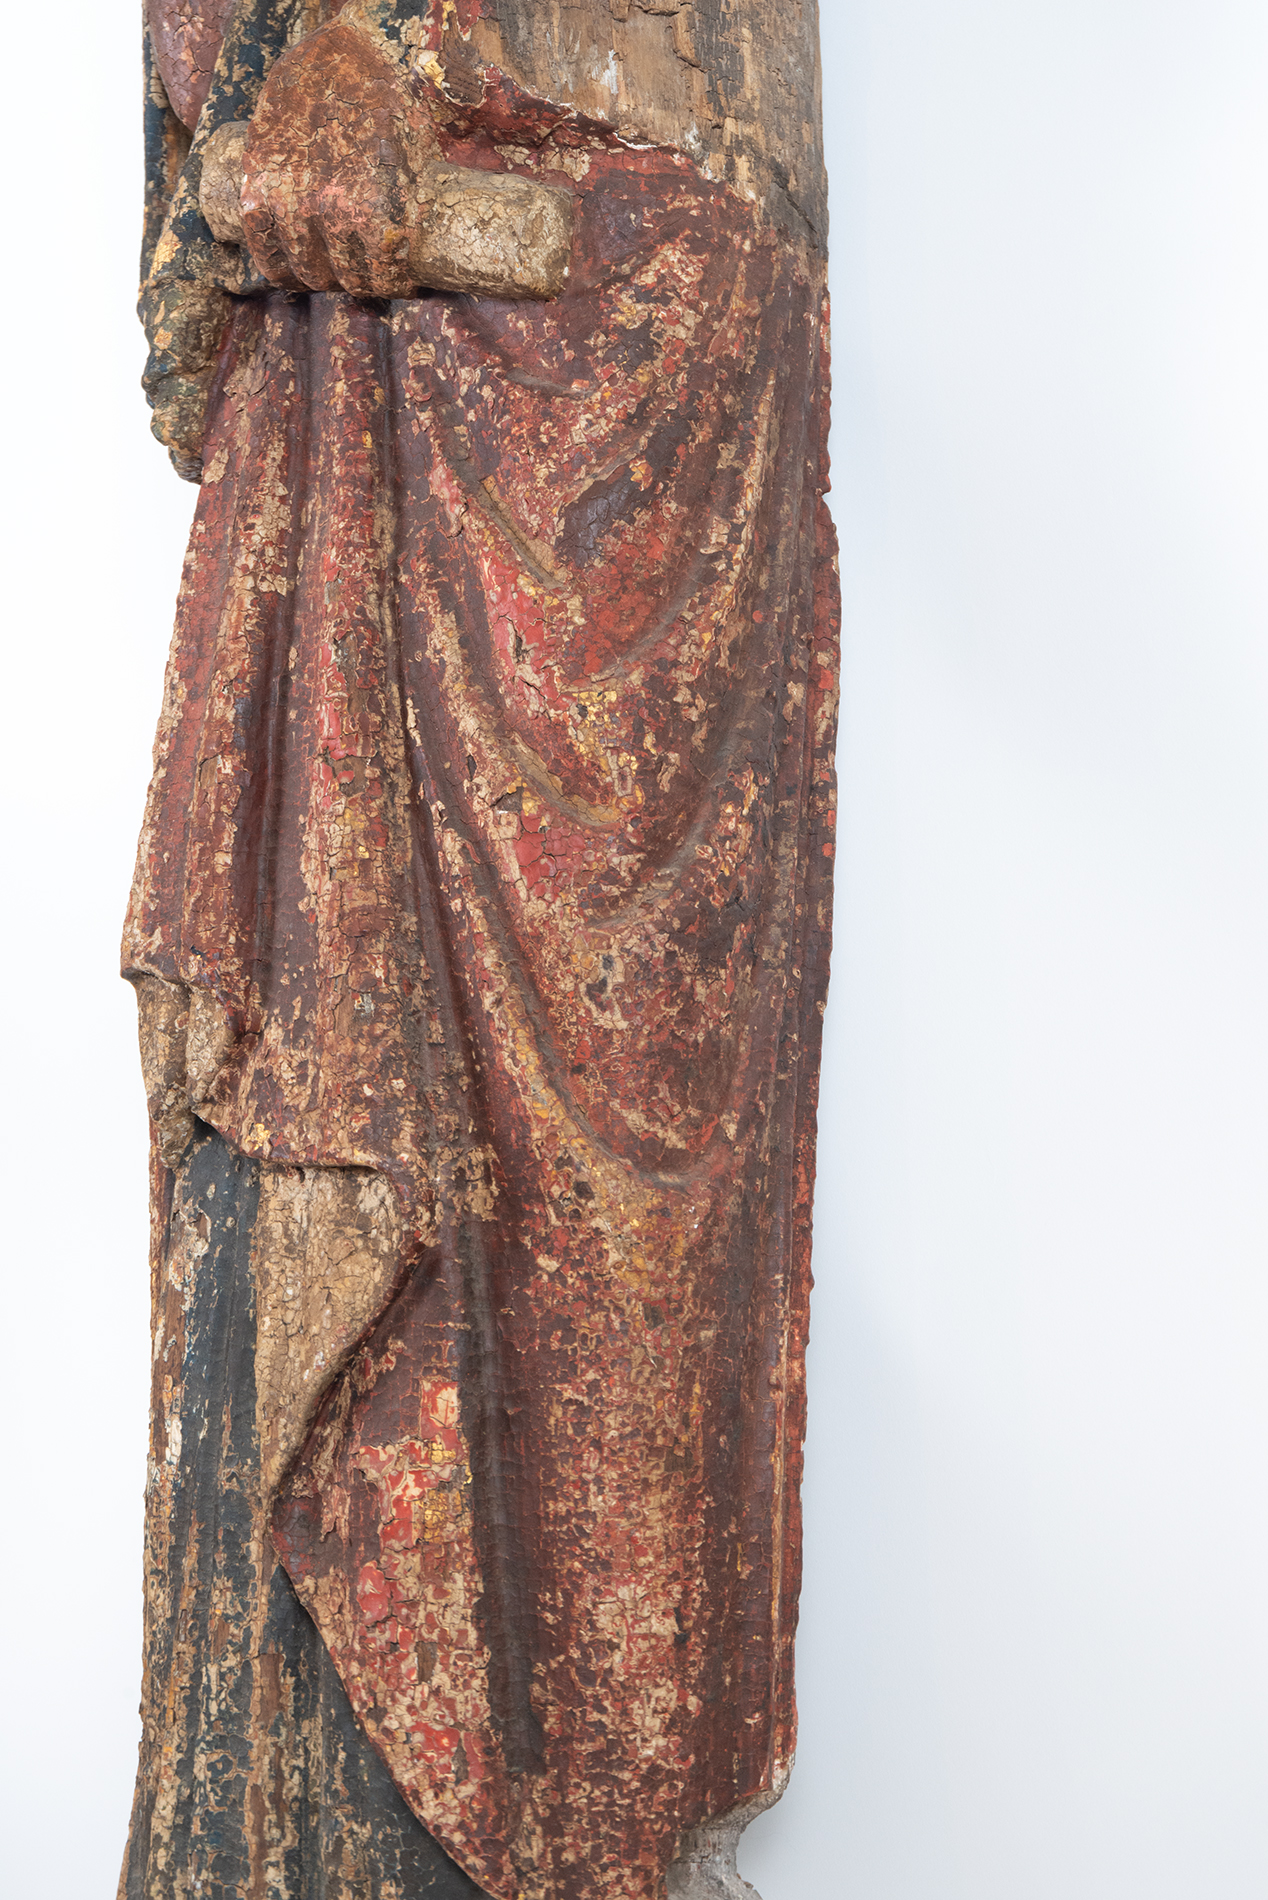 Pair of Large Romanesque Carvings representing Mary and Saint John the Evangelist, Romanesque School - Image 9 of 22